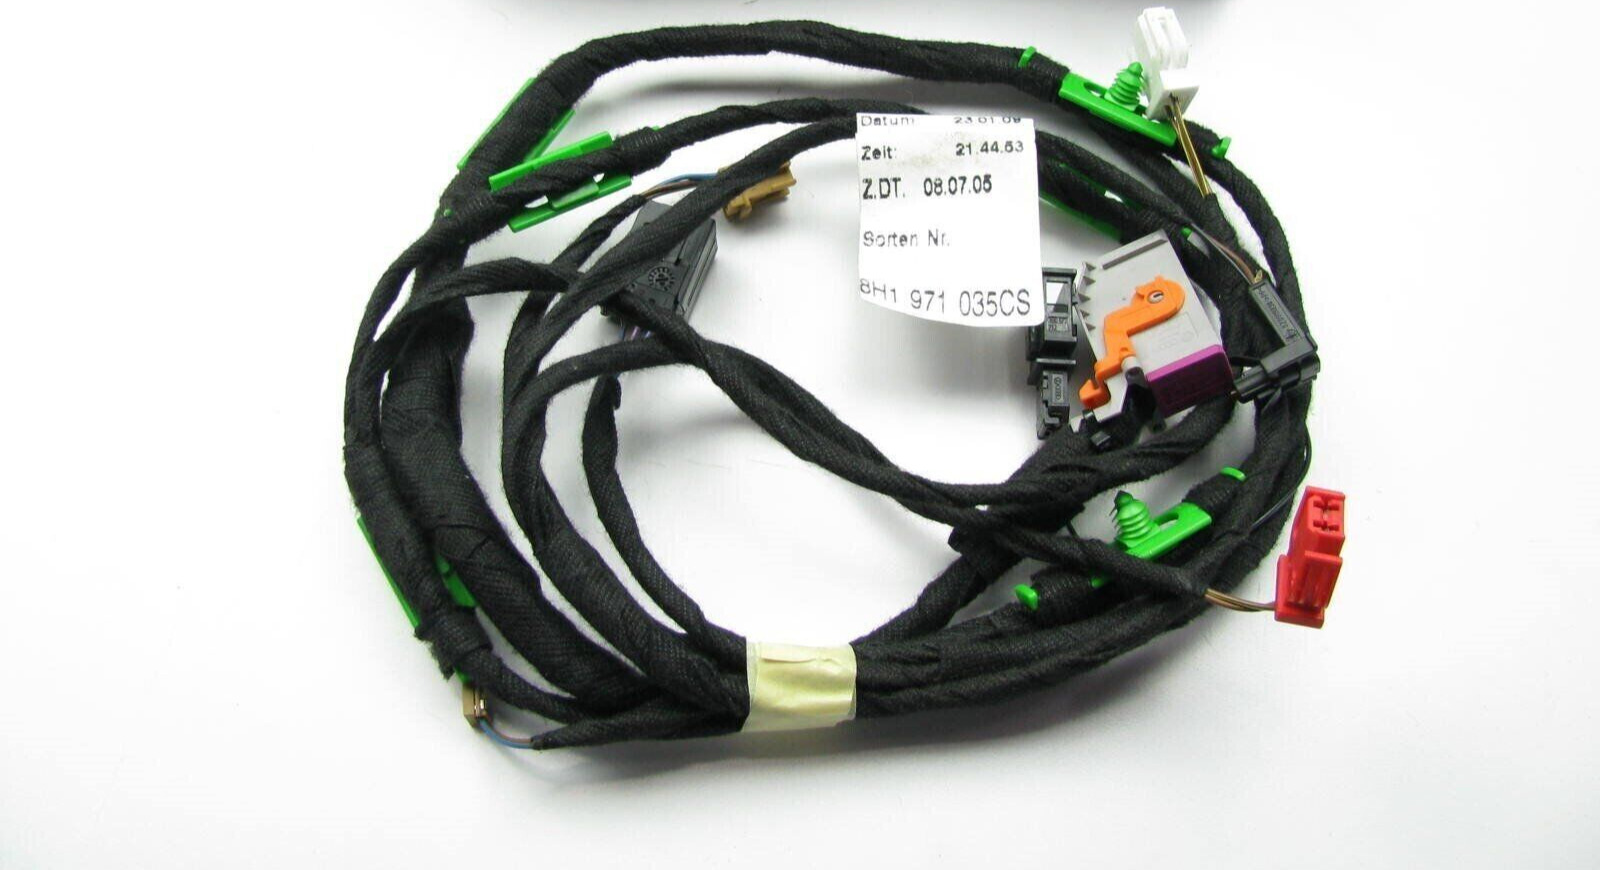 04-08 Audi S4 A4 8H1971035CS Front Right Side Door Wire Harness OEM